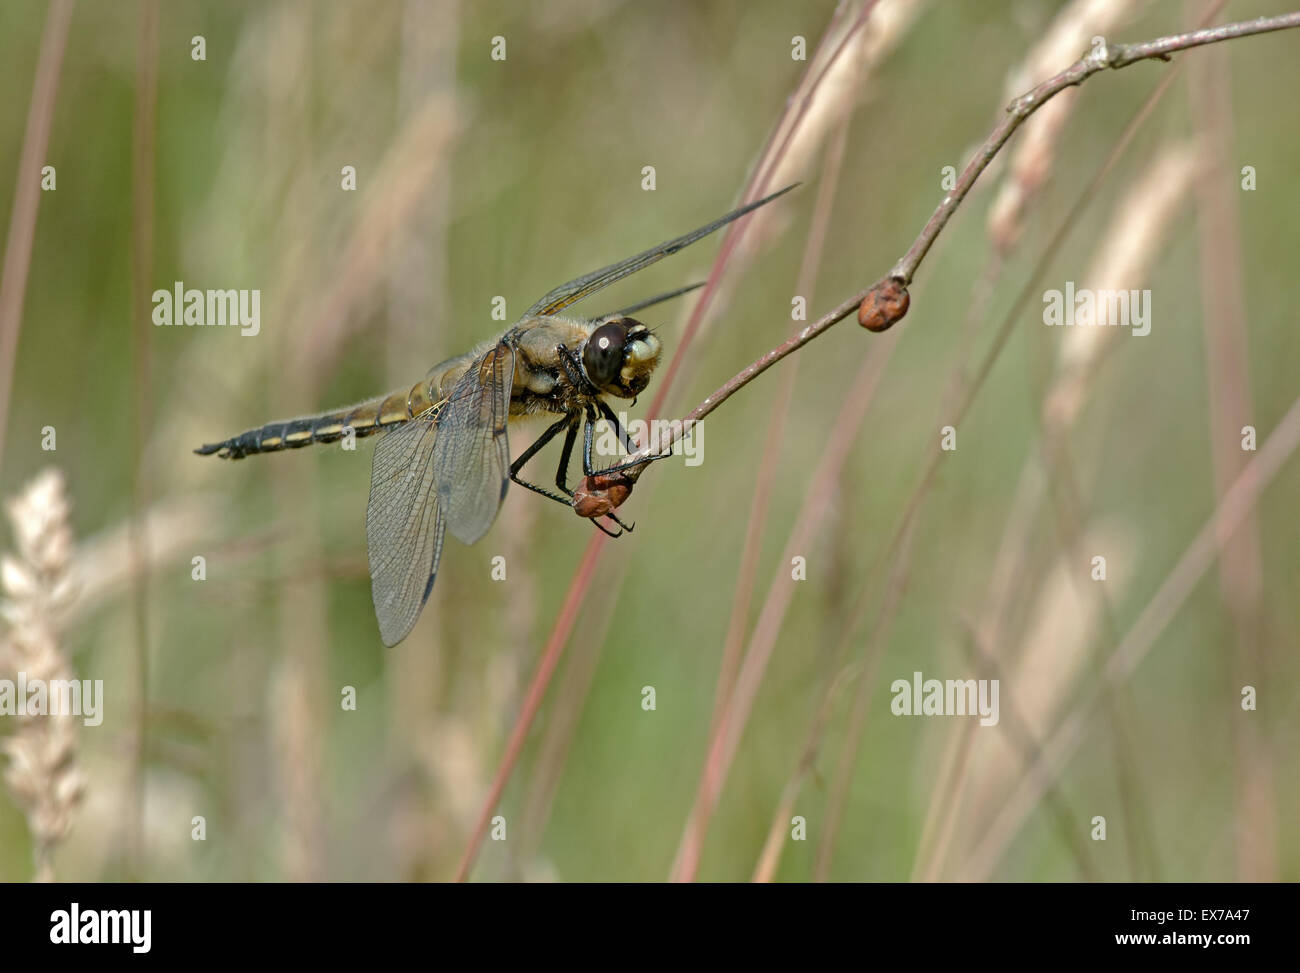 Weibliche Four-Spotted Chaser Libelle (Libellula Quadrimaculata) Uk Stockfoto